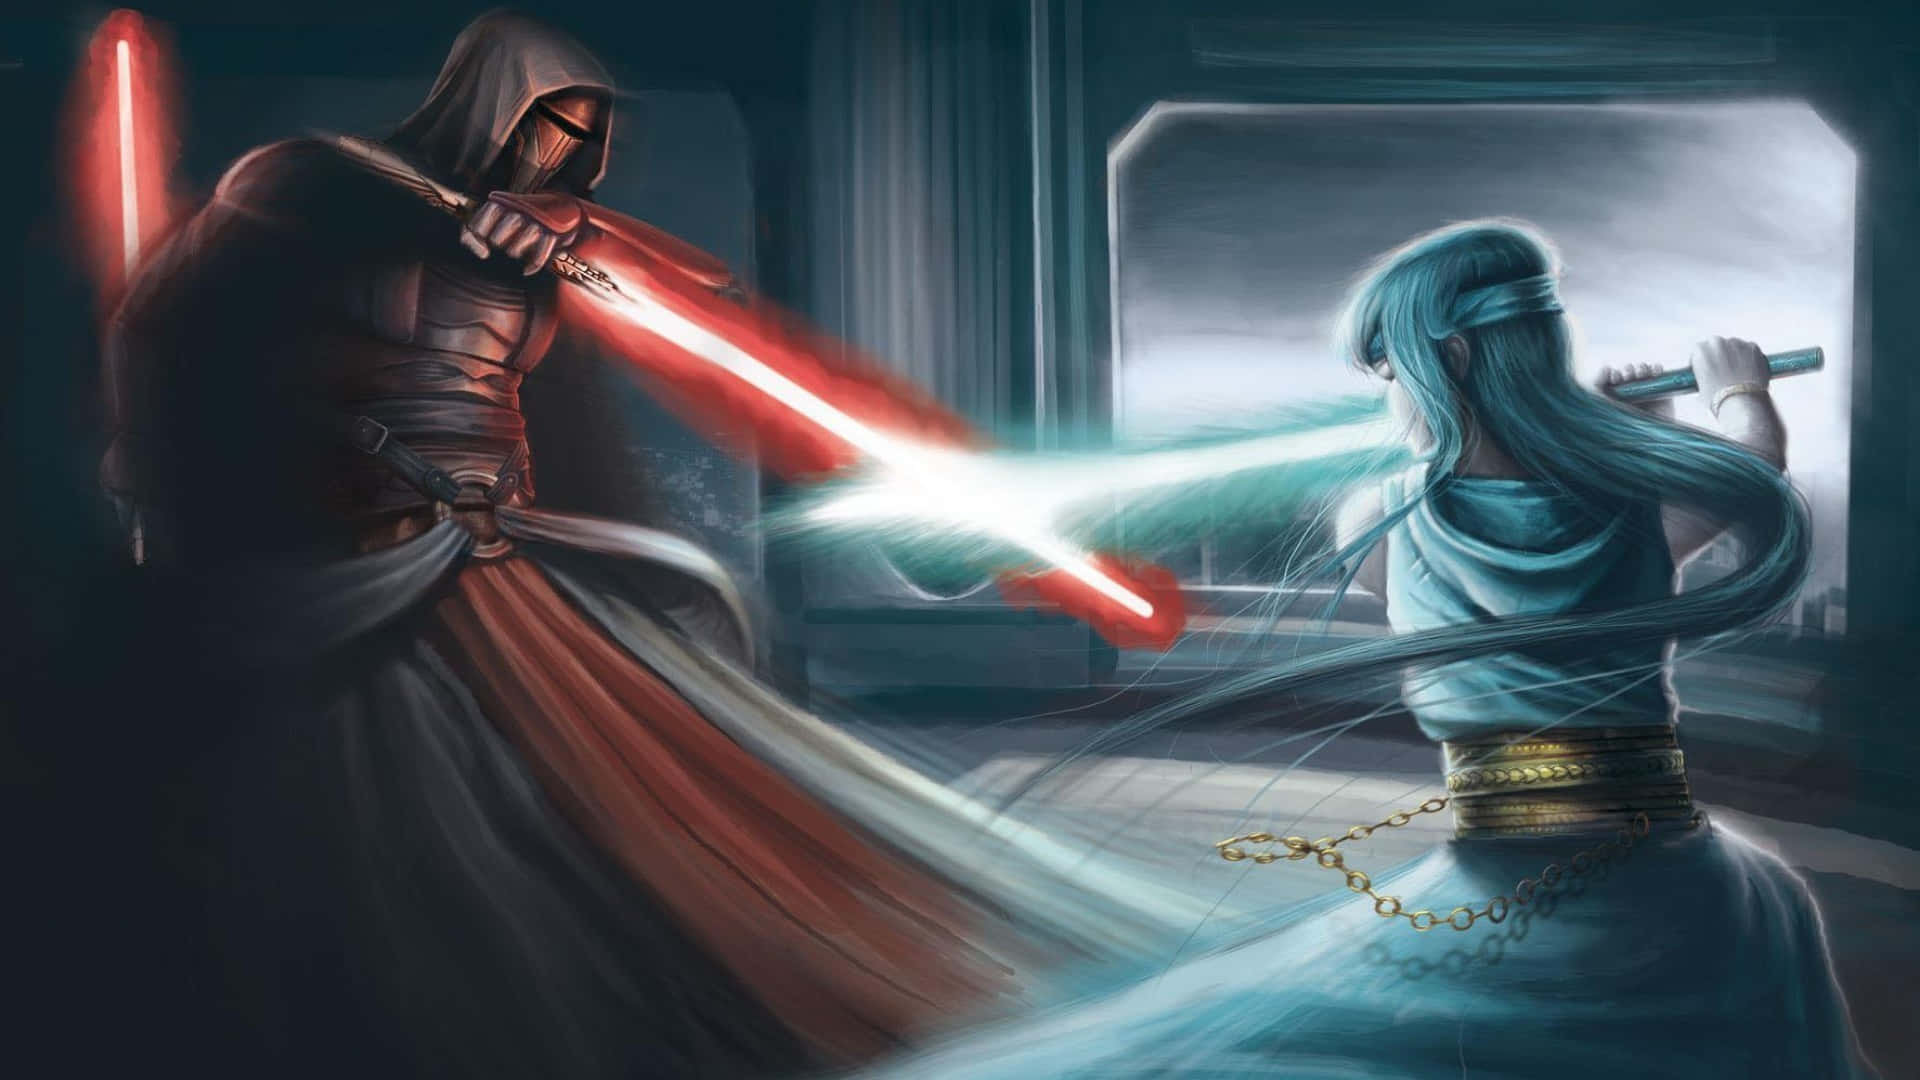 Two Jedi masters in a dazzling lightsaber duel Wallpaper